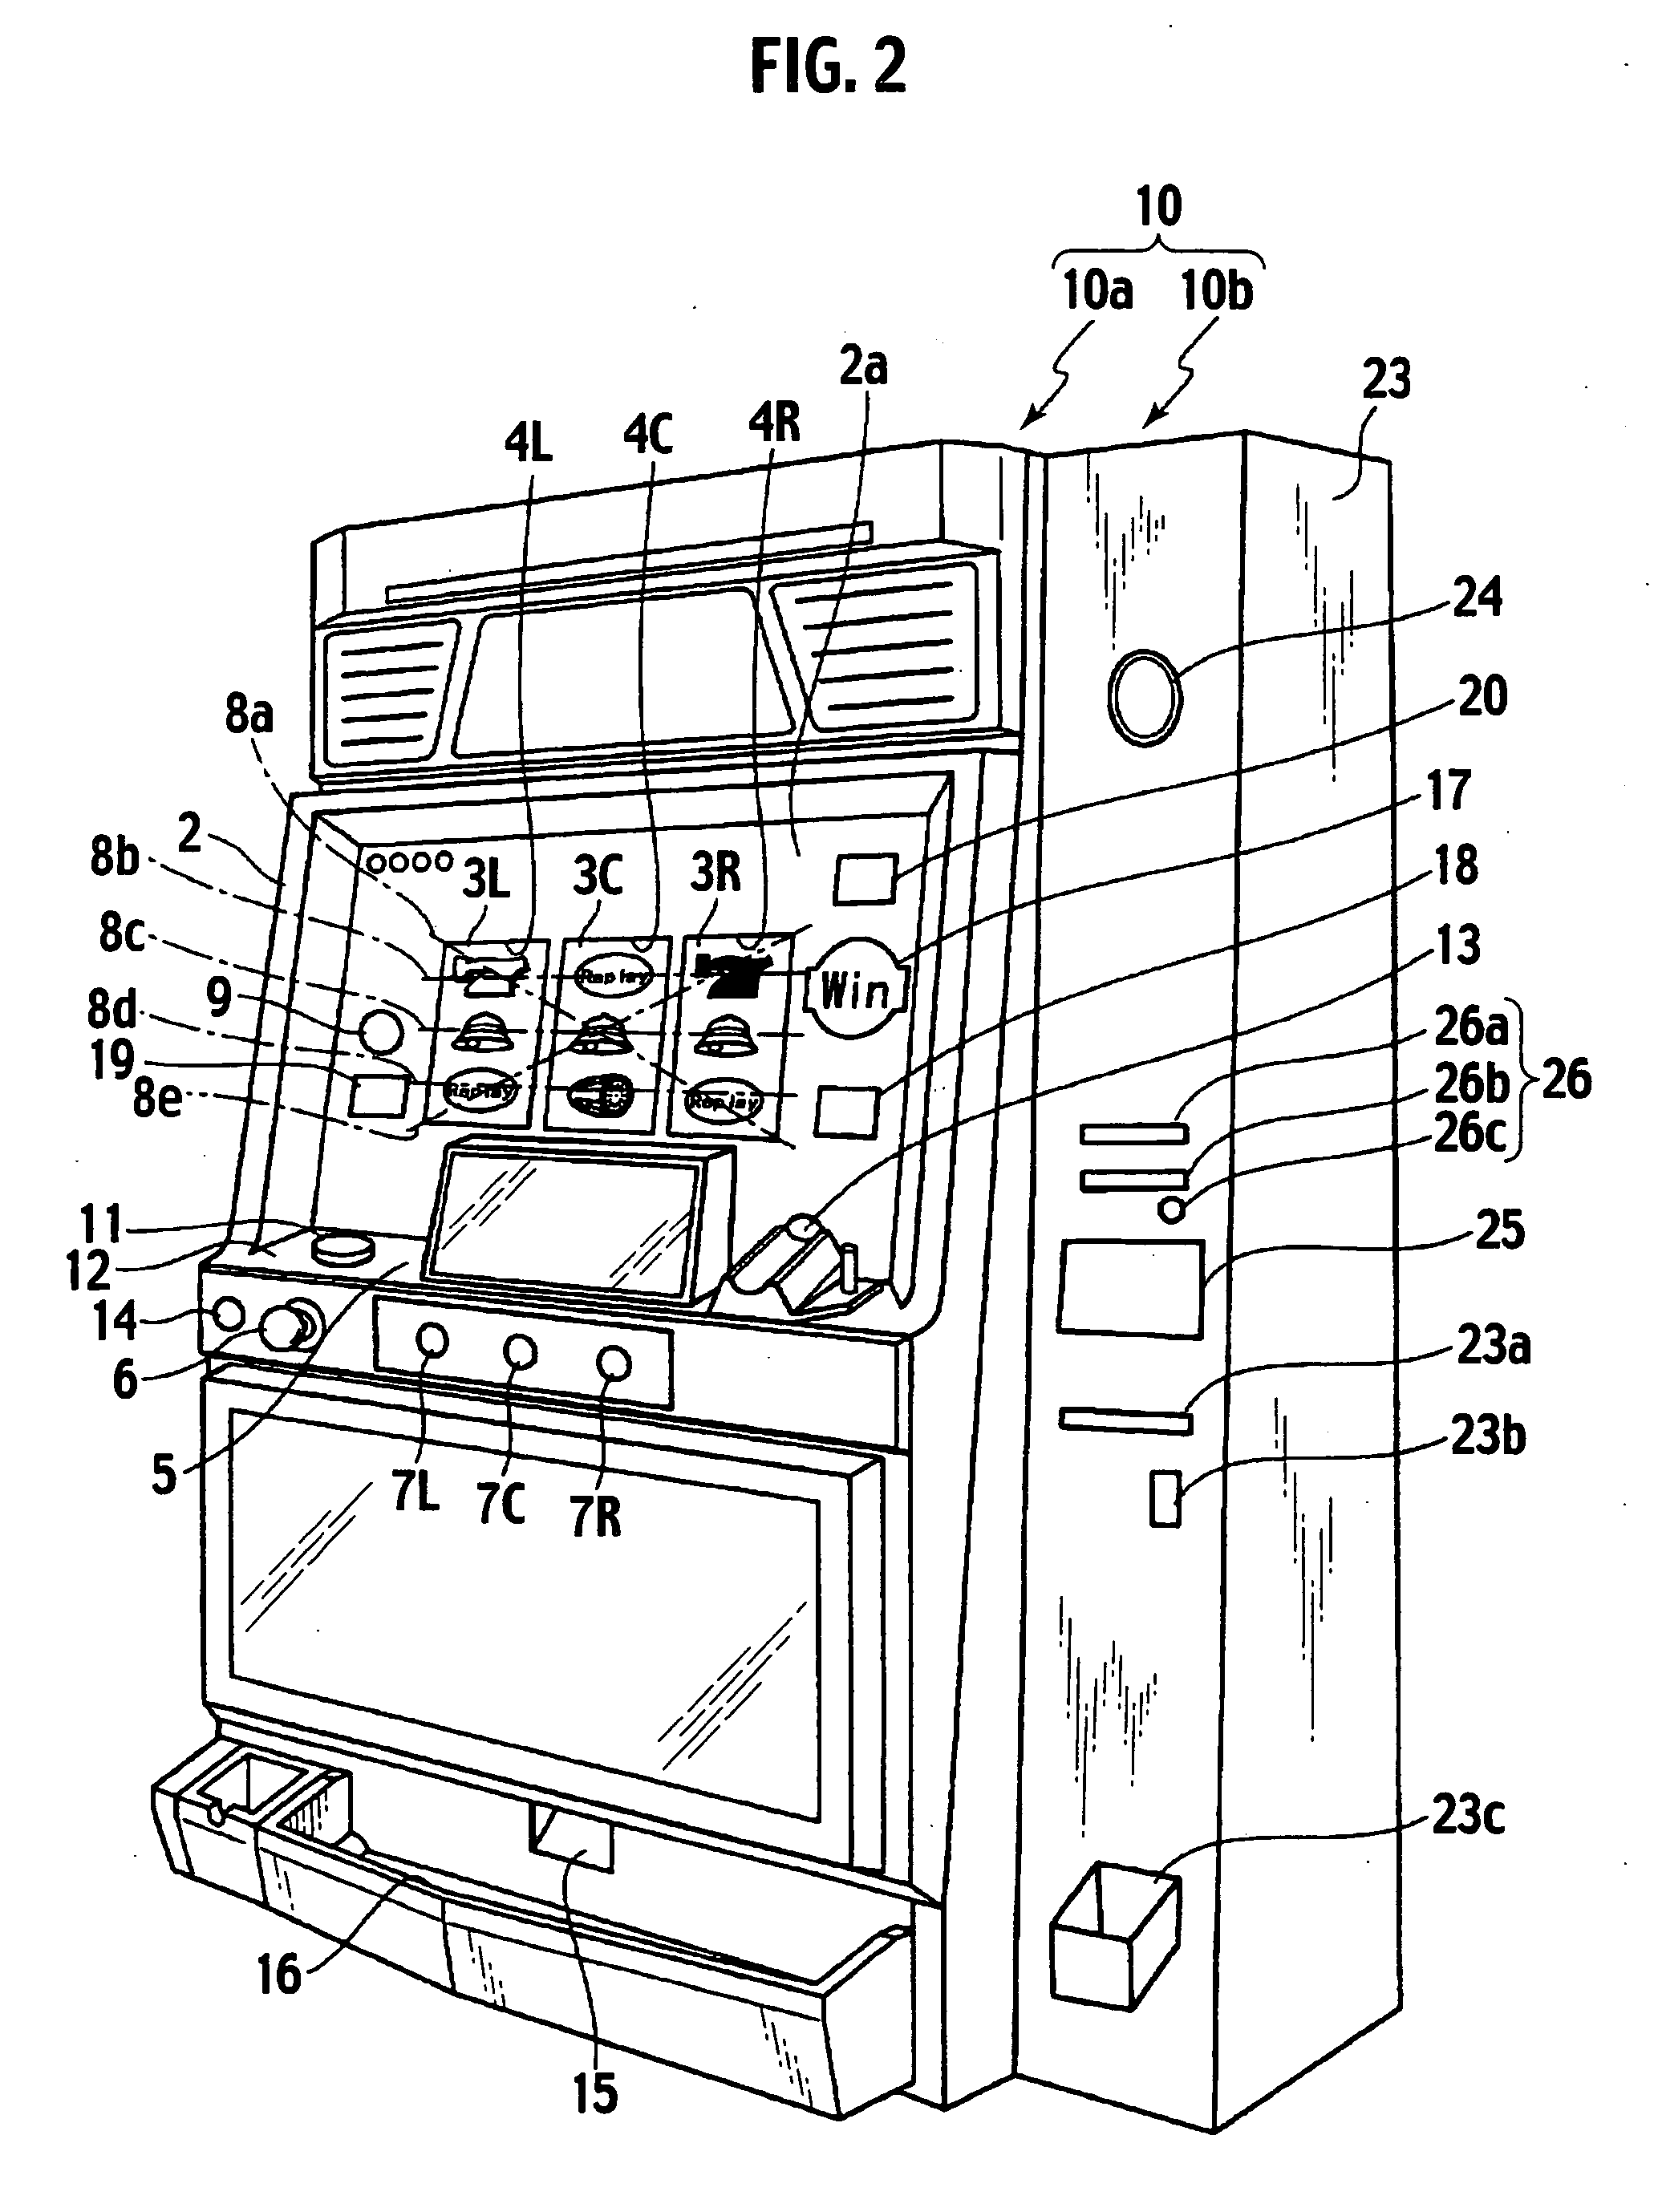 Player authentication device, player management server, gaming machine and sandwiched device